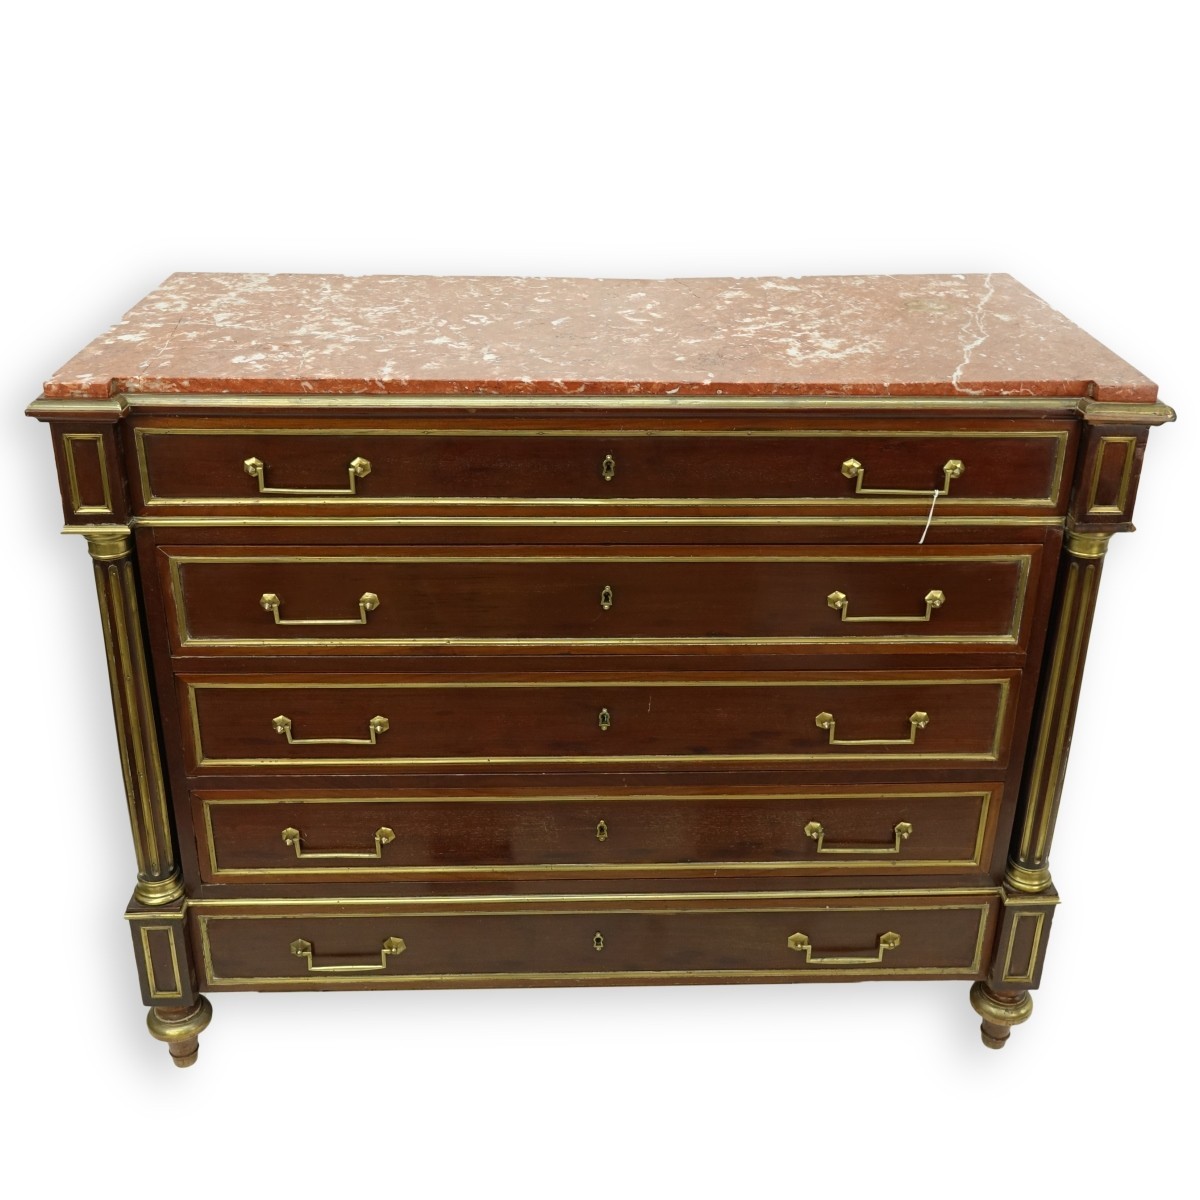 19C French Louis XVI Style Marble Top Commode